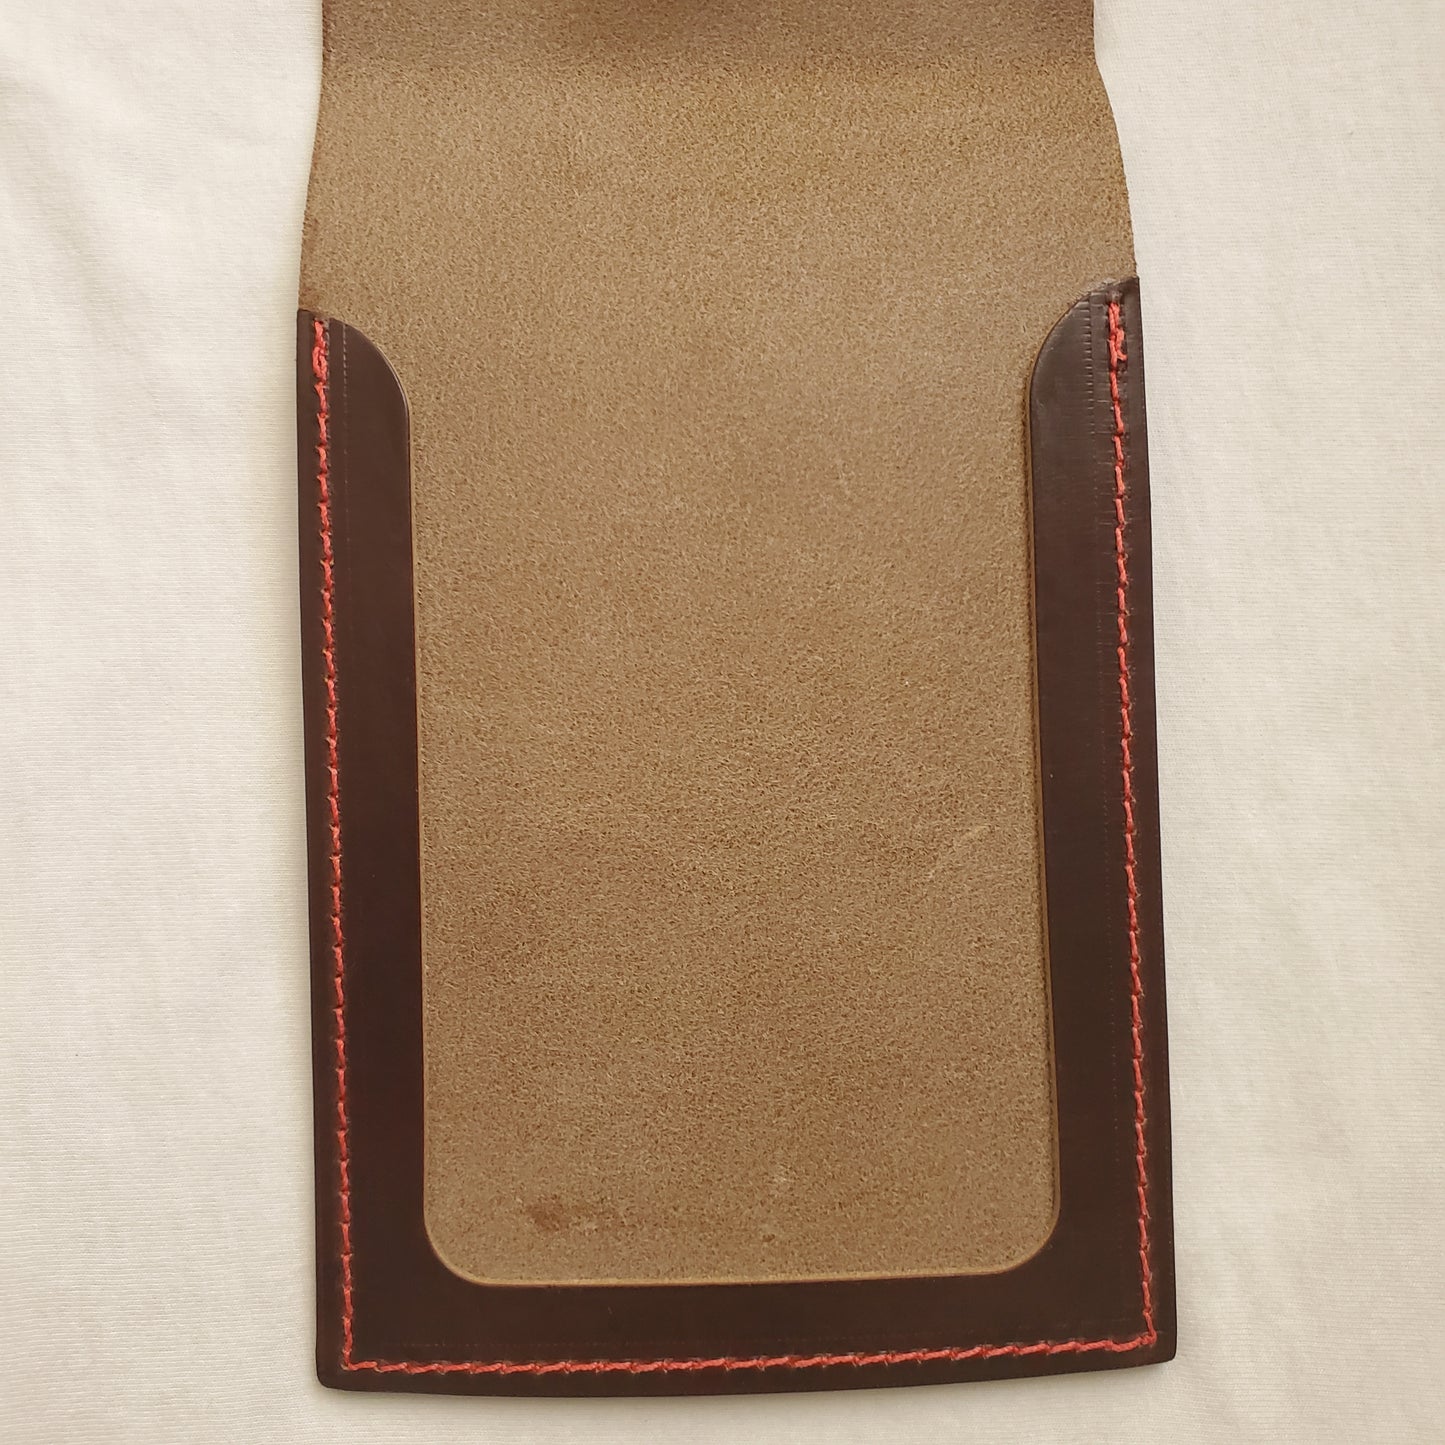 NH Yardage Book Cover 2nd Edition